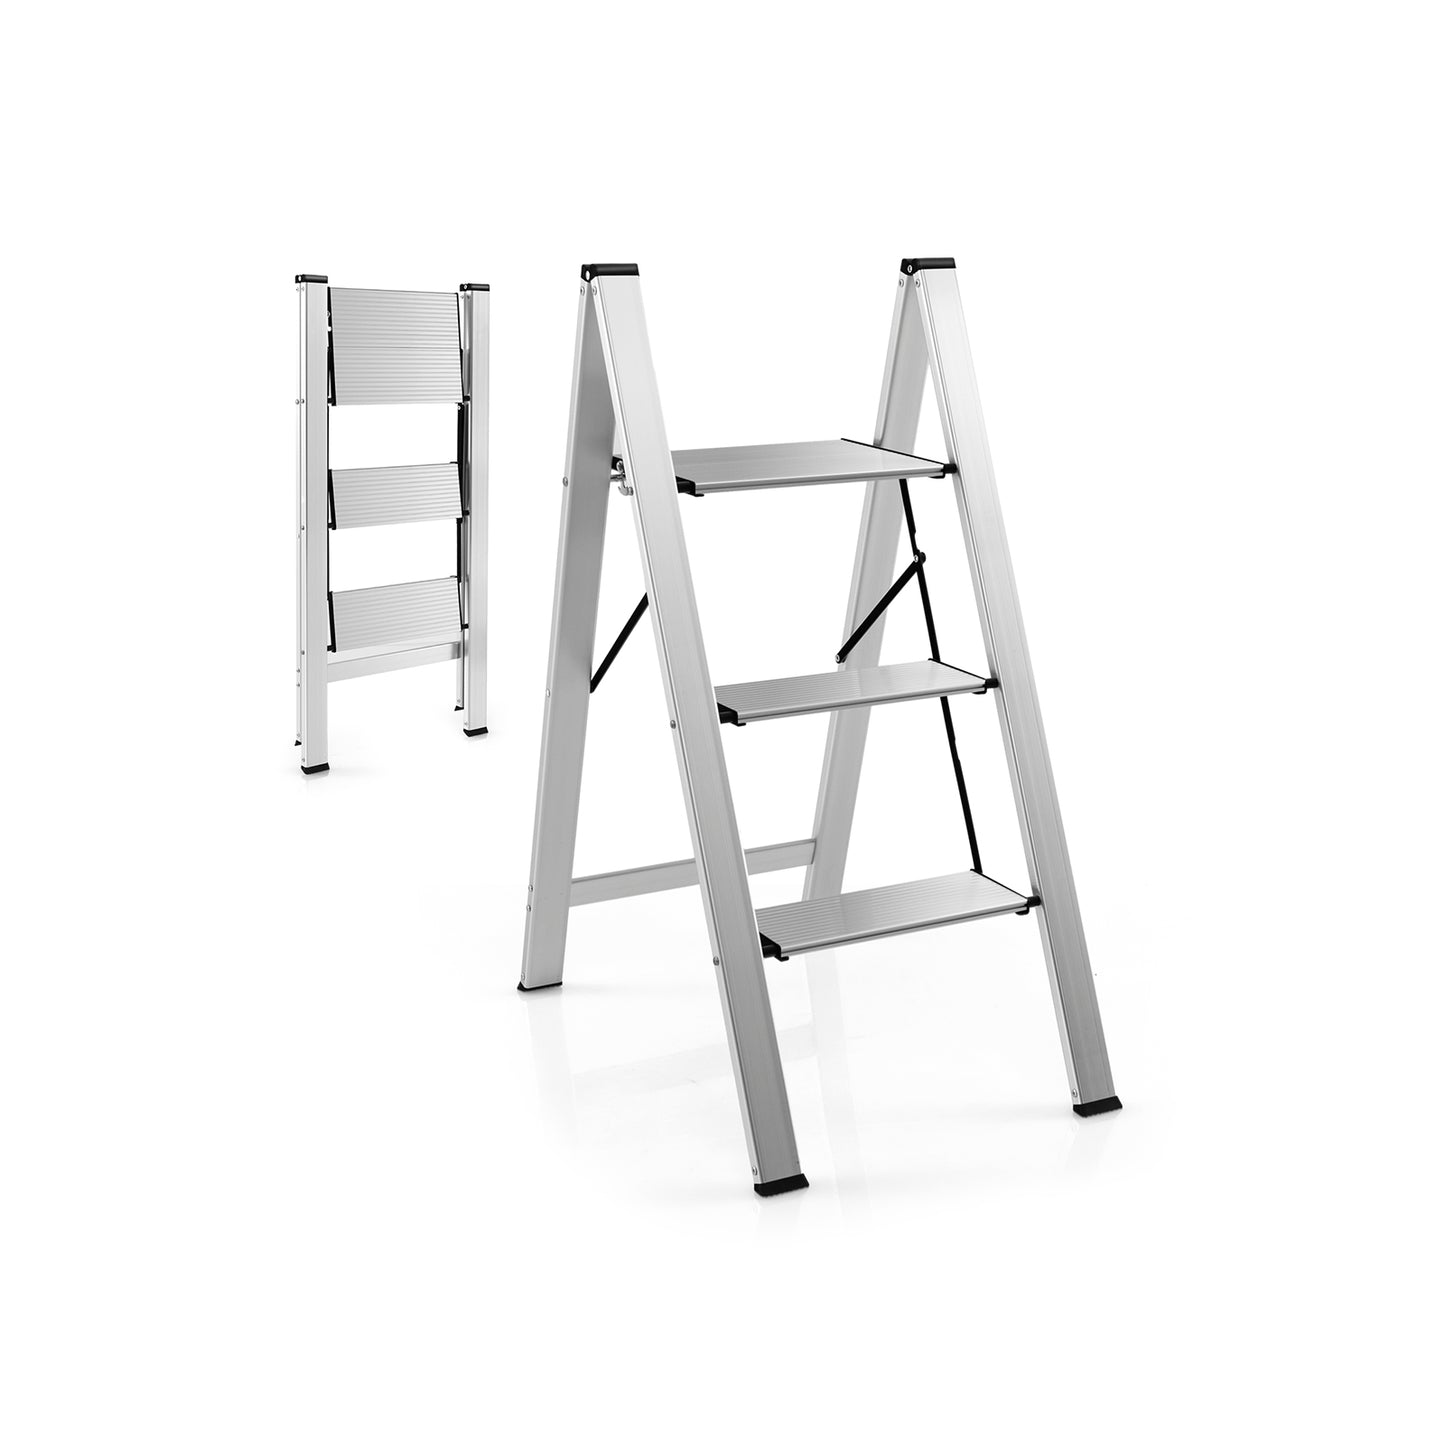 Step stool, 3 Step Ladder, Step Ladder, Folding Ladder with Wide Anti-Slip Pedal, Silver, Costway, 2